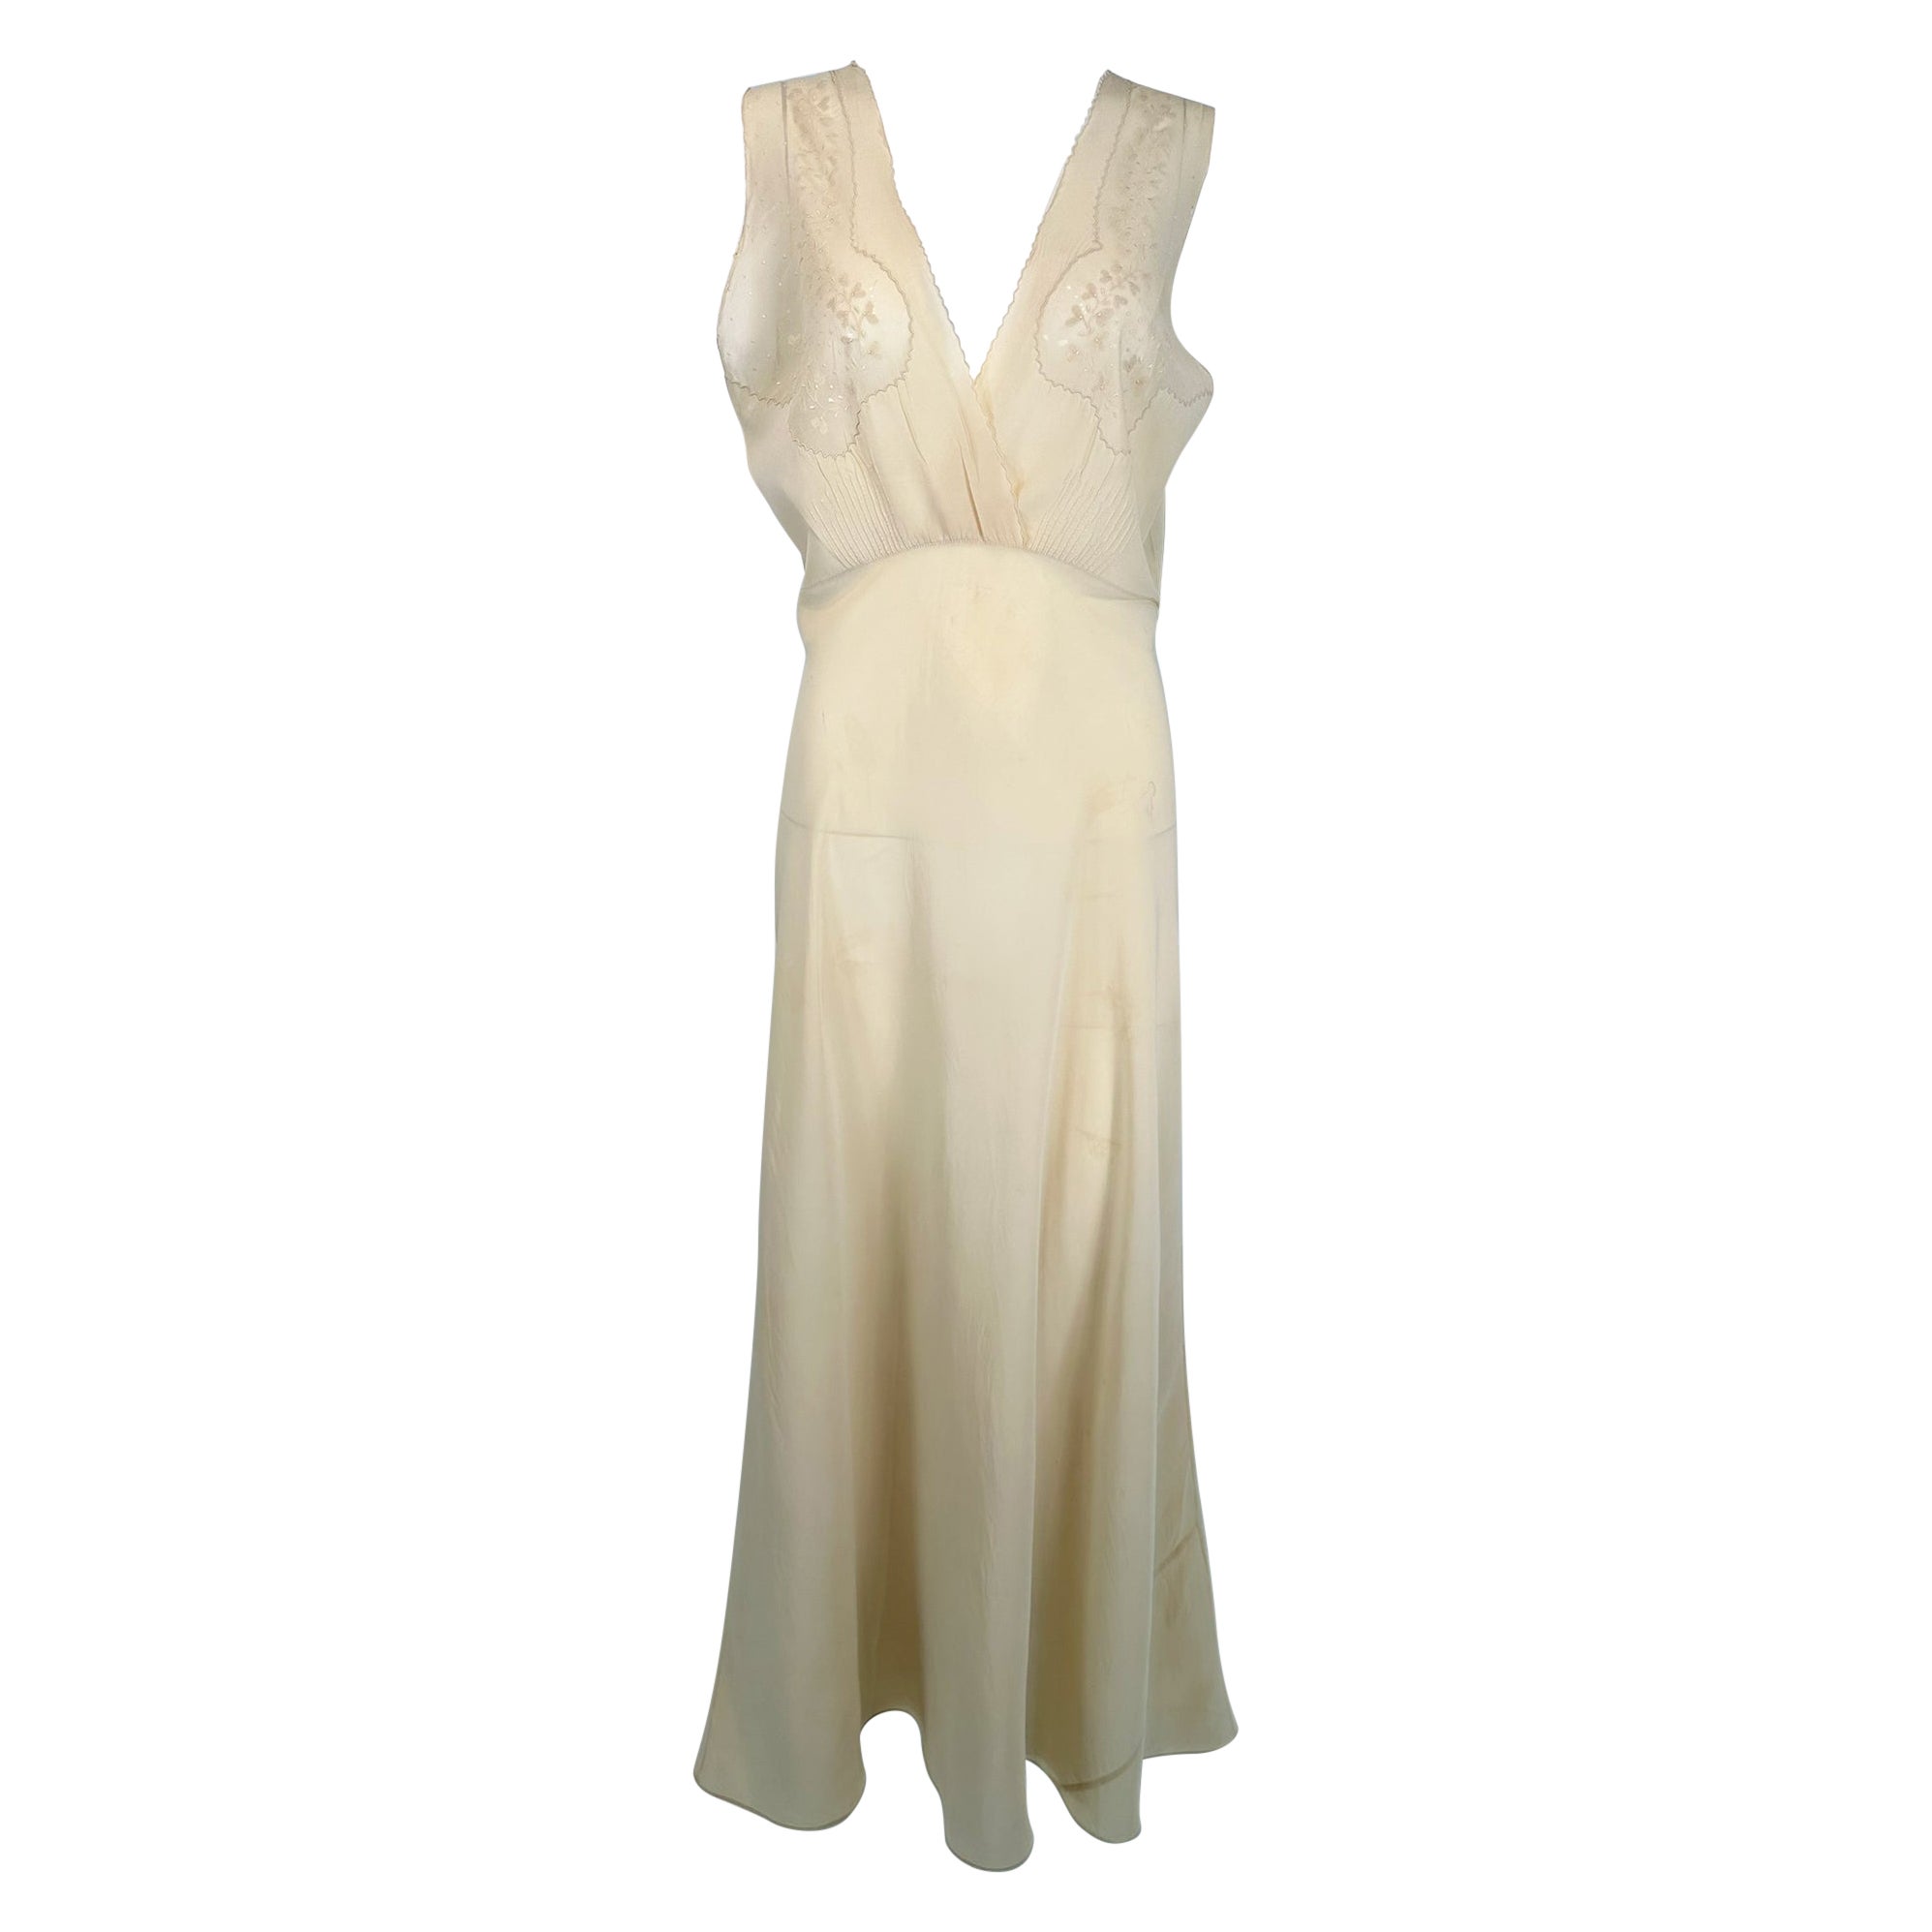 1930s Cream Bias Cut Sheer Silk Hand Embroidered & Appliqued Slip Dress Gown For Sale